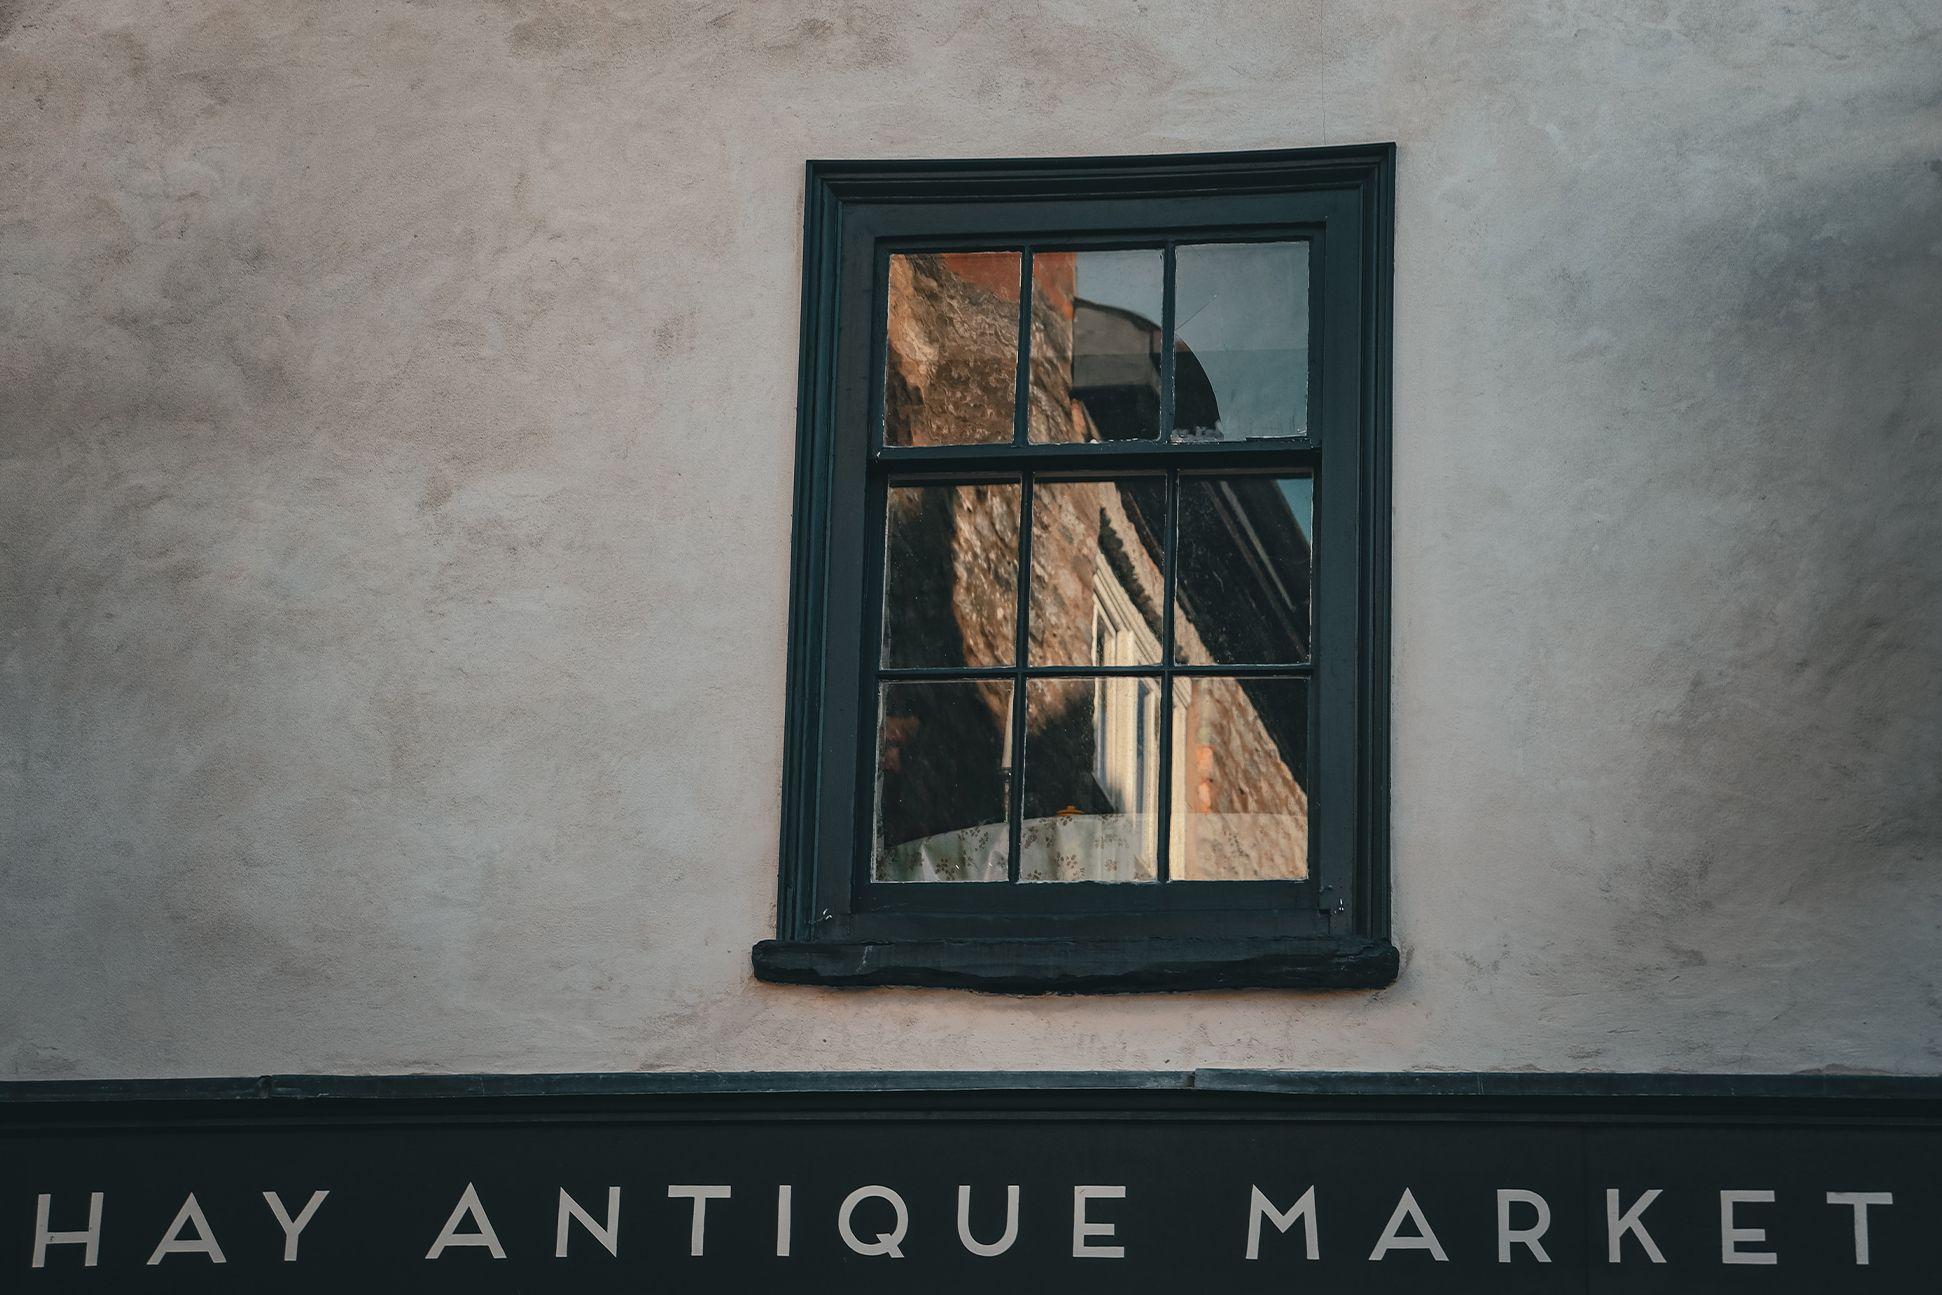 A window above a shop sign that reads "Hay Antique Market" 